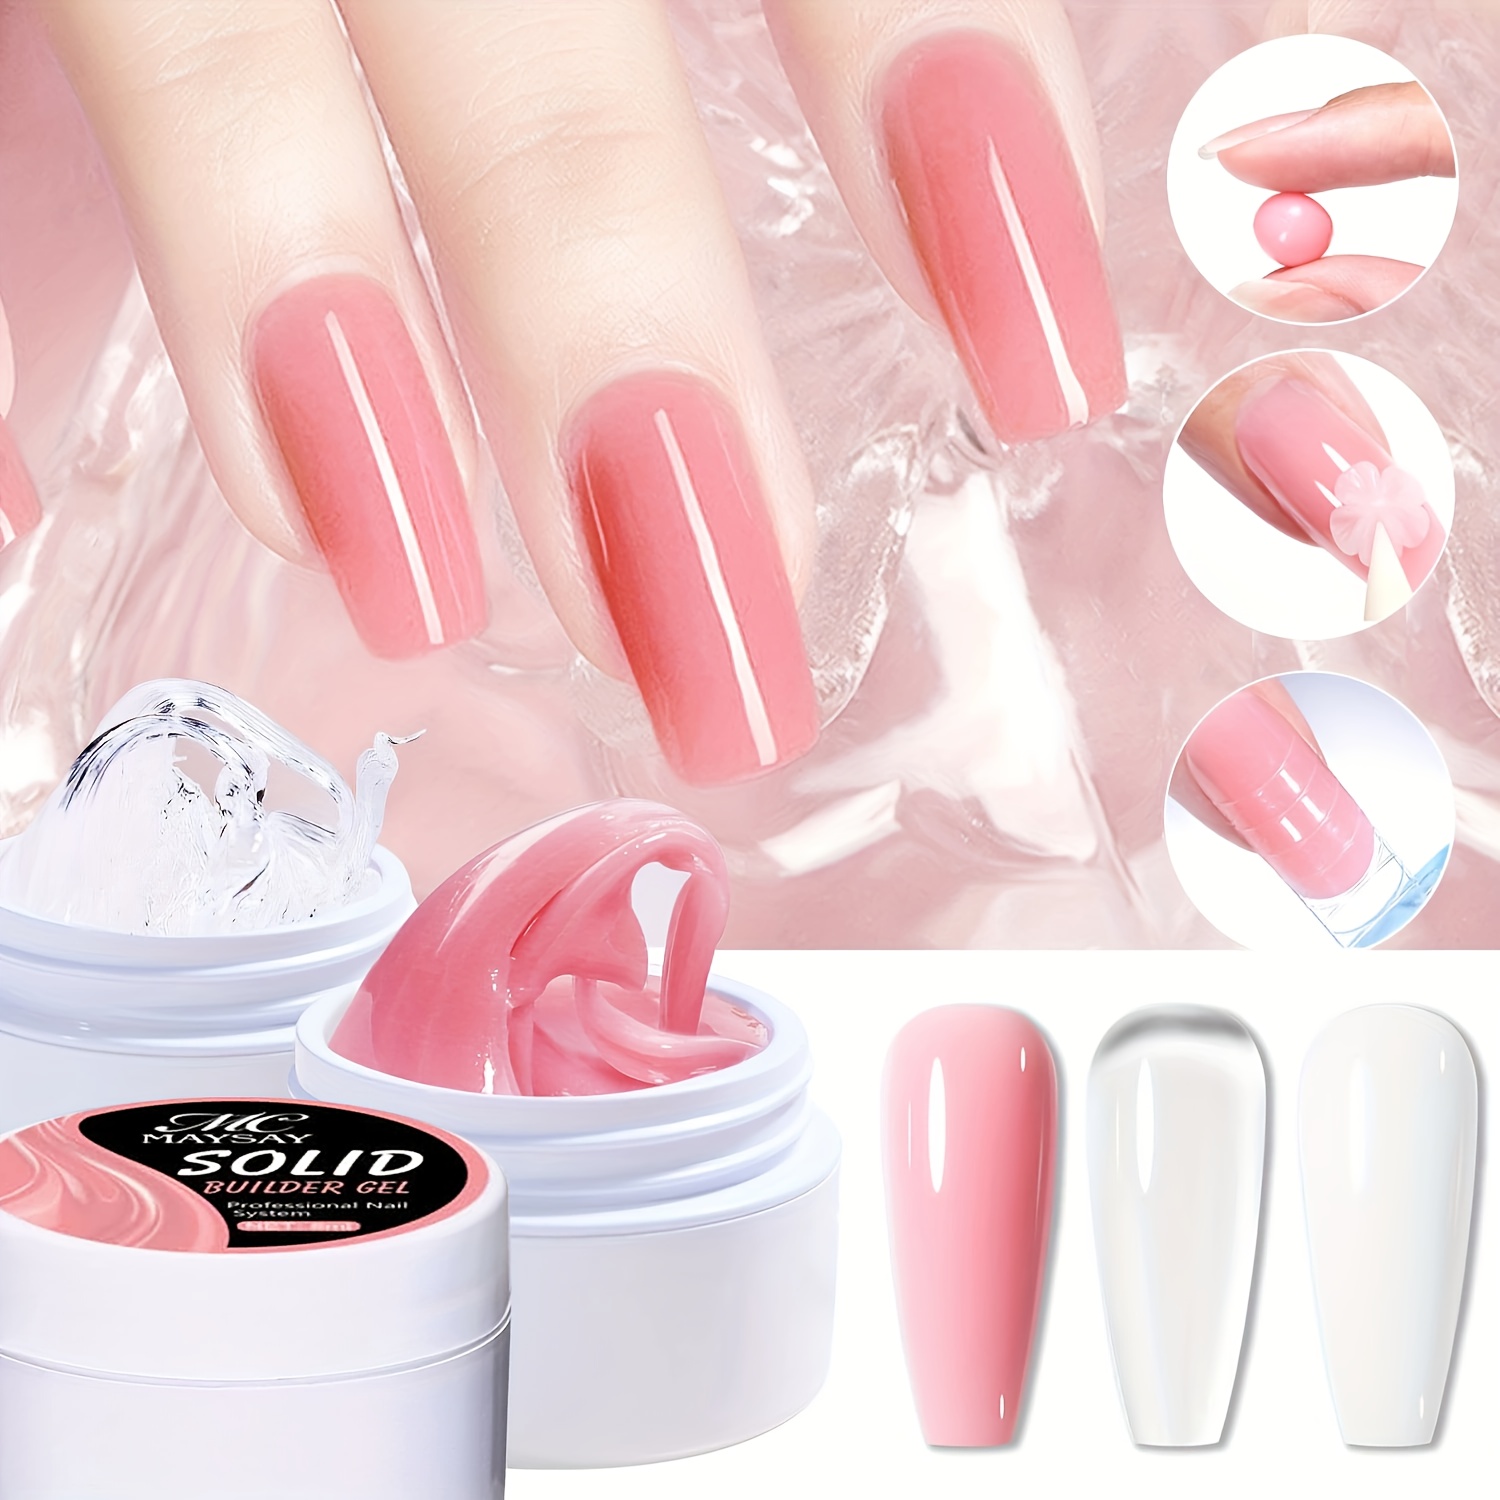 Solid Builder Gel Nails Extension Hard Nail Gel Non sticky - Temu